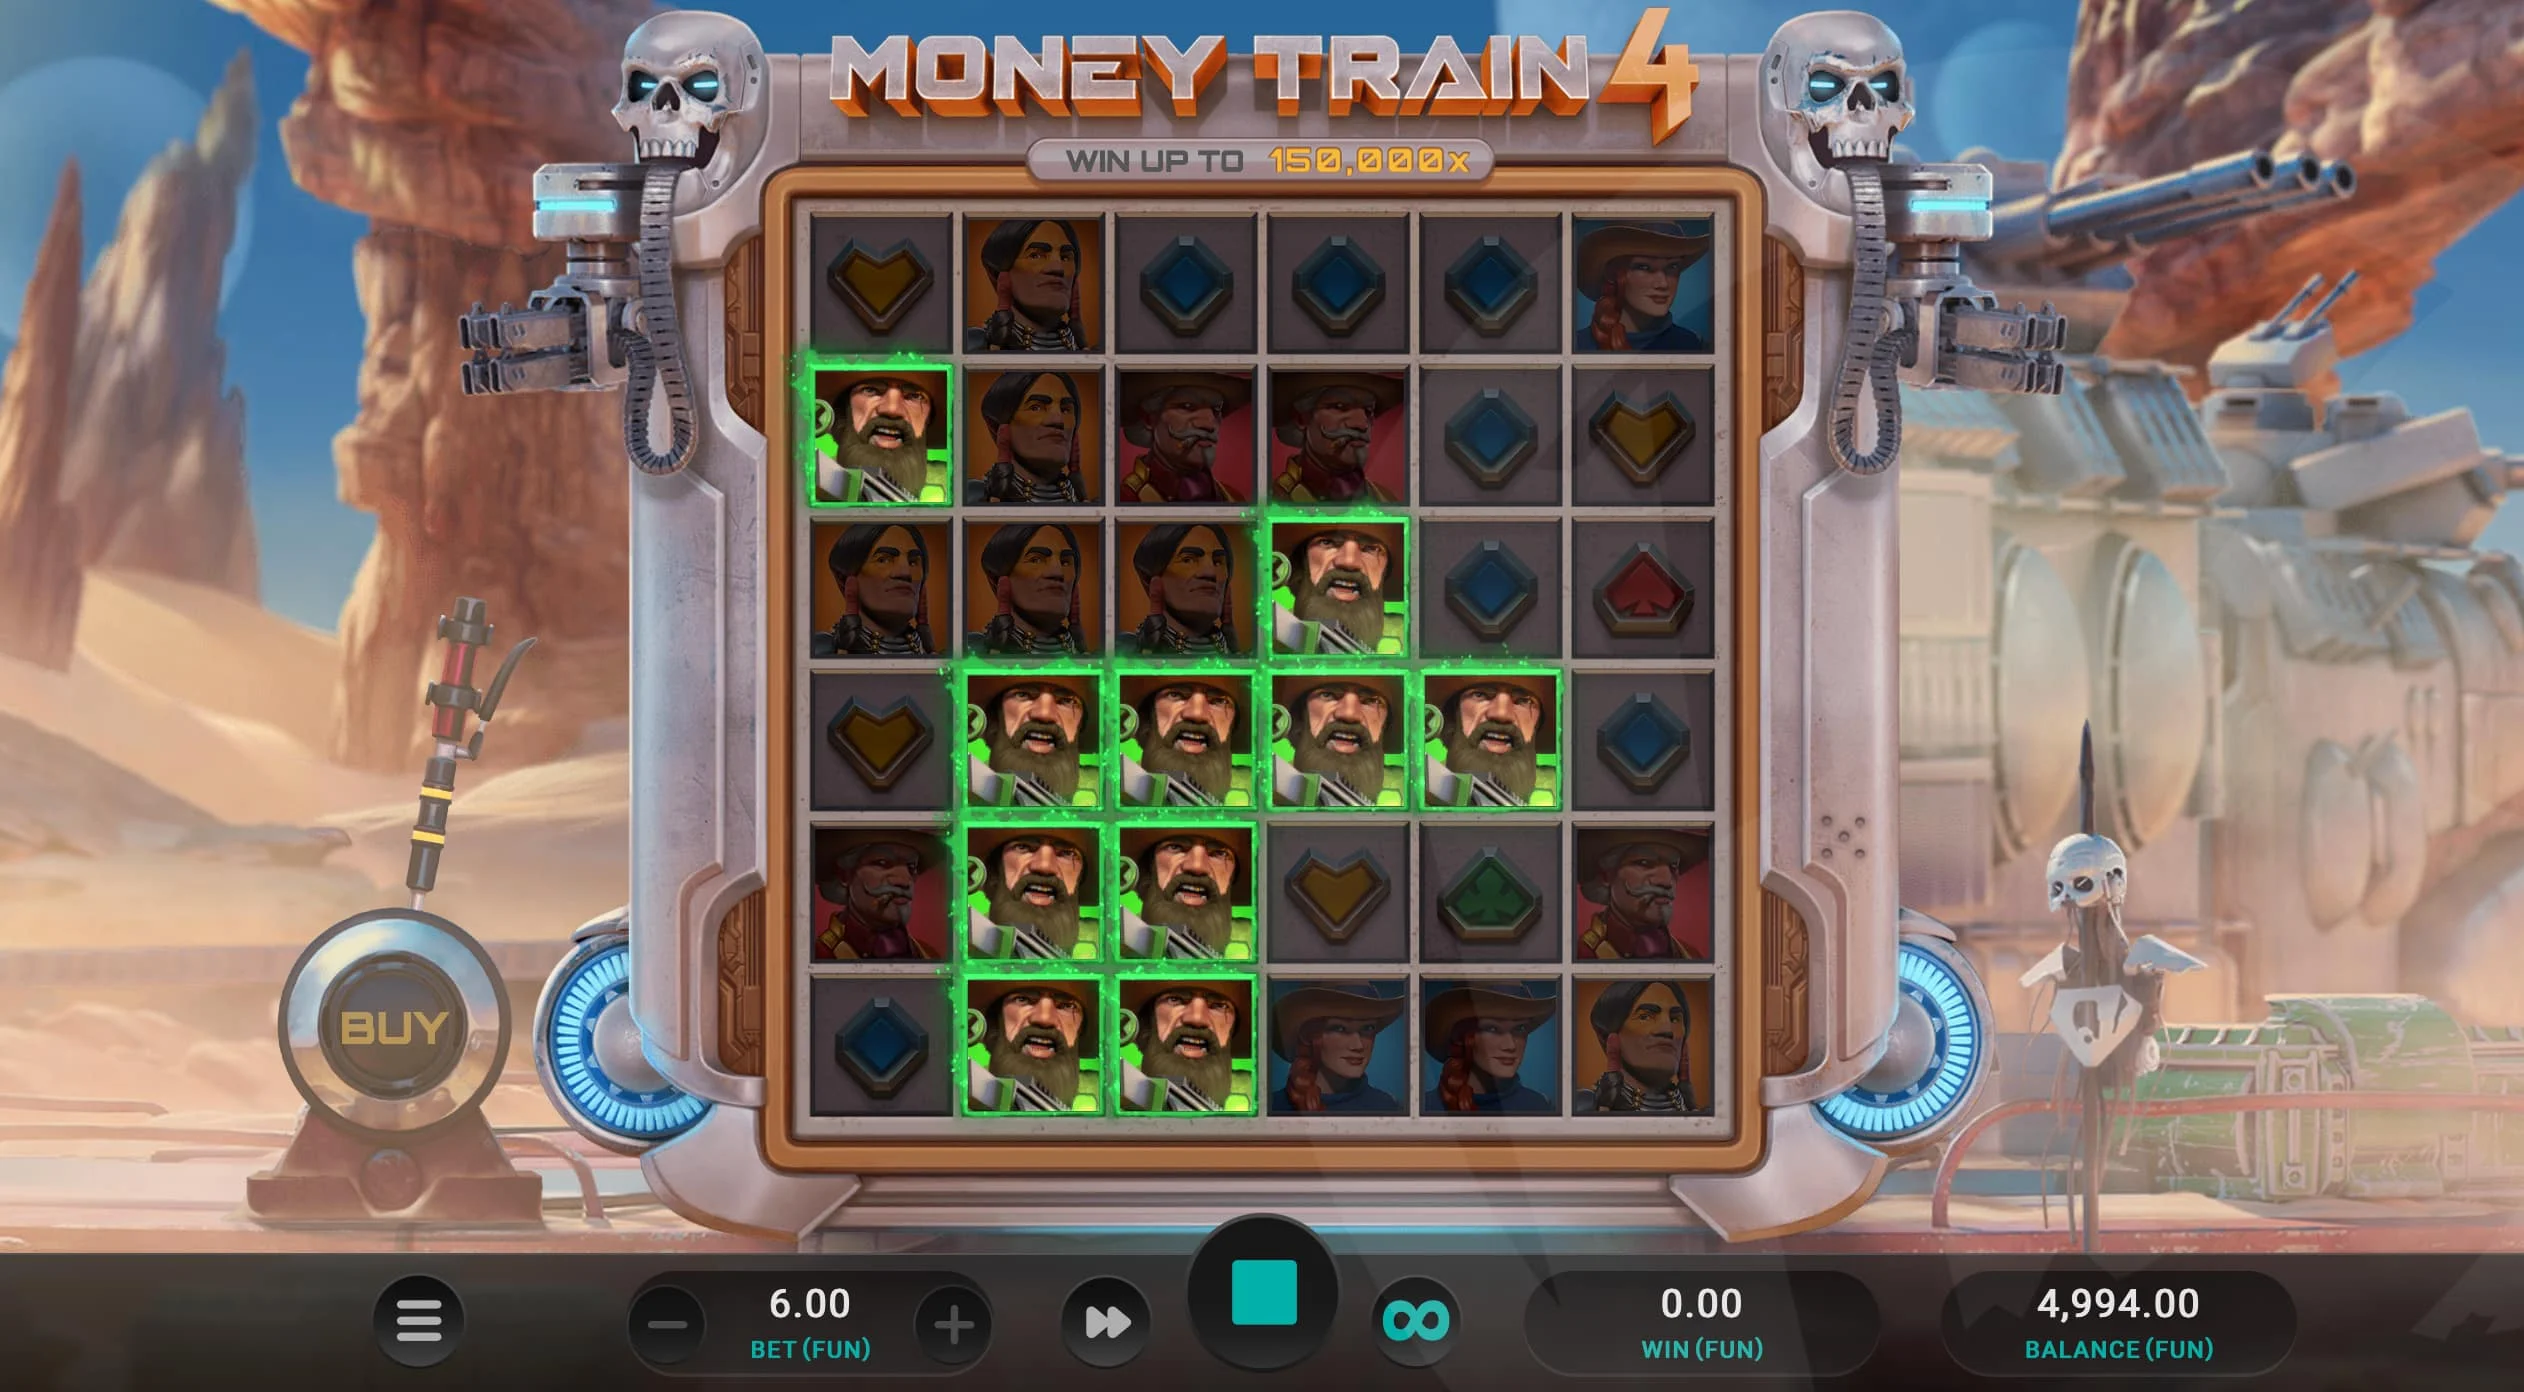 Land 10 or More Symbols in View to Form Wins in Money Train 4